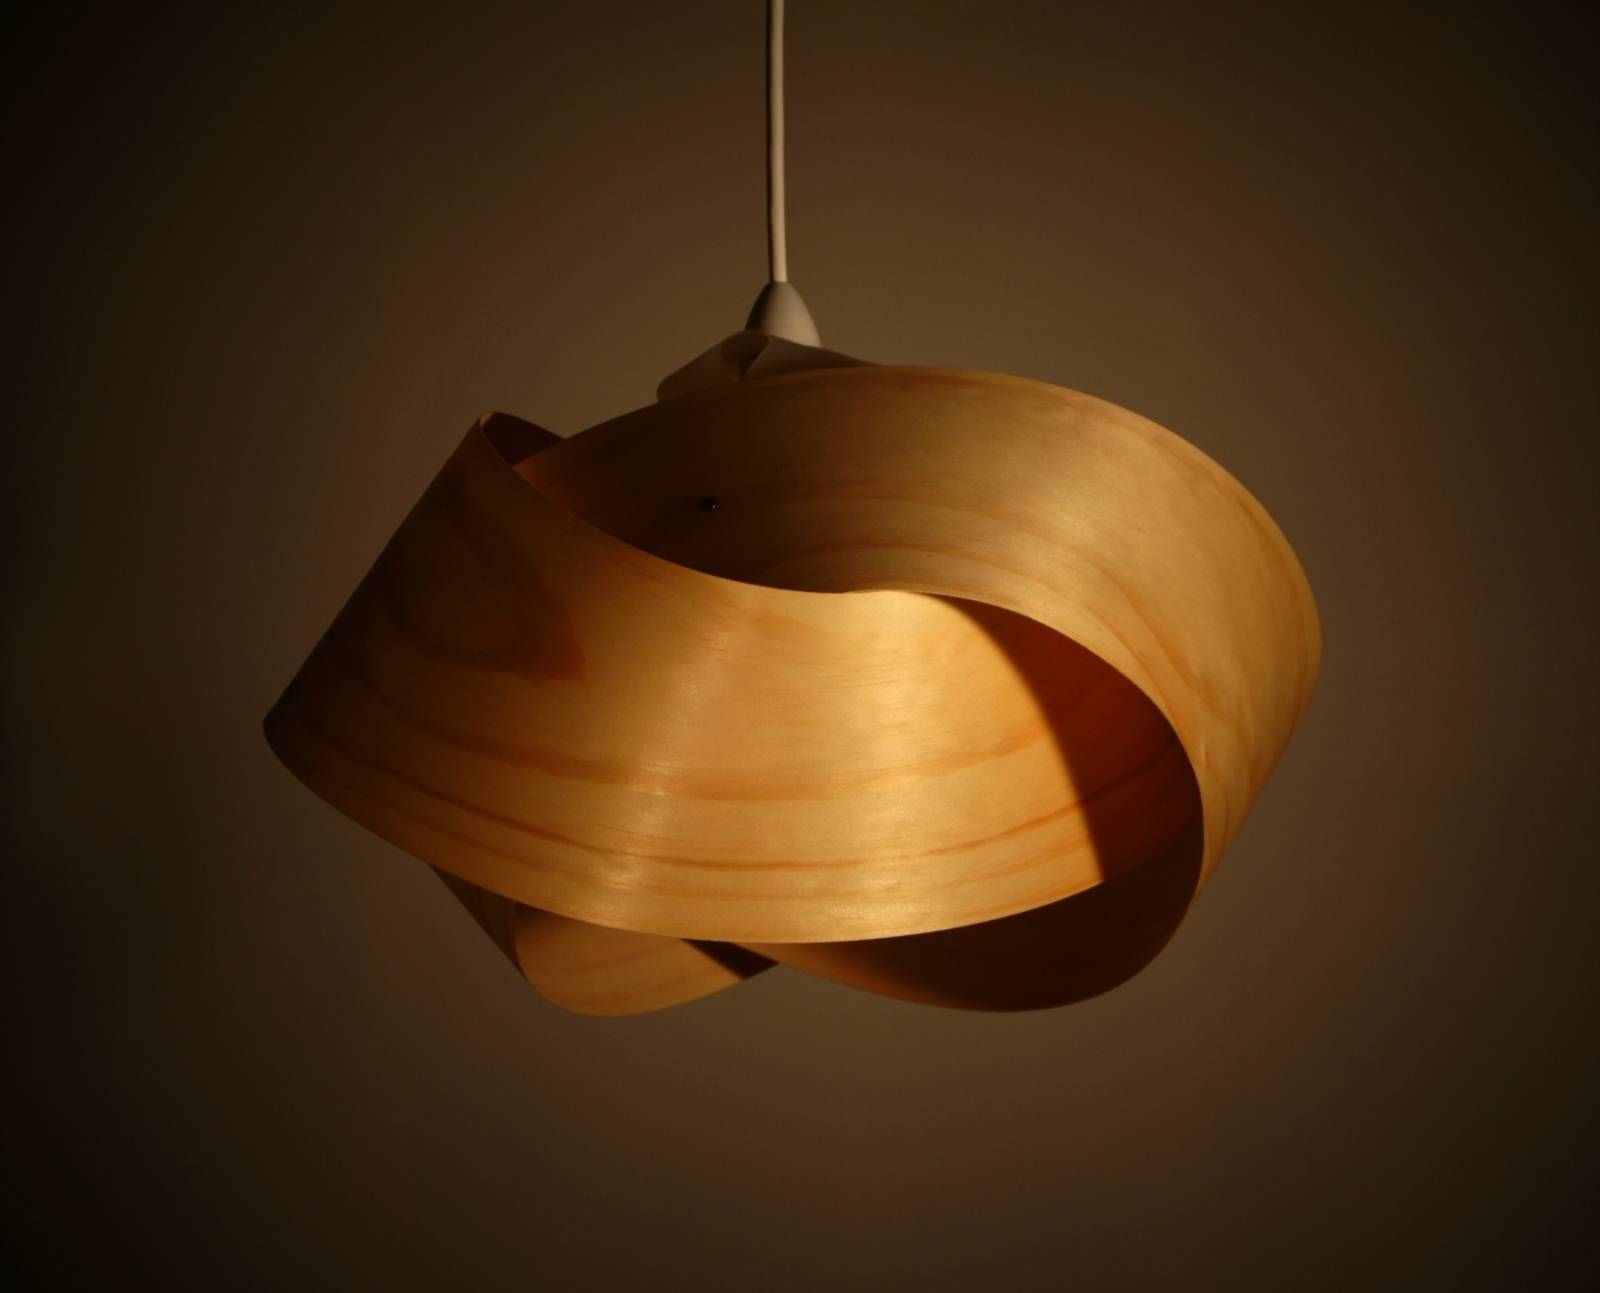 Wooden Lamp Shades Nz Lamps With Remarkable Light Shade Concept Throughout Wood Veneer Lighting Pendants (View 6 of 15)